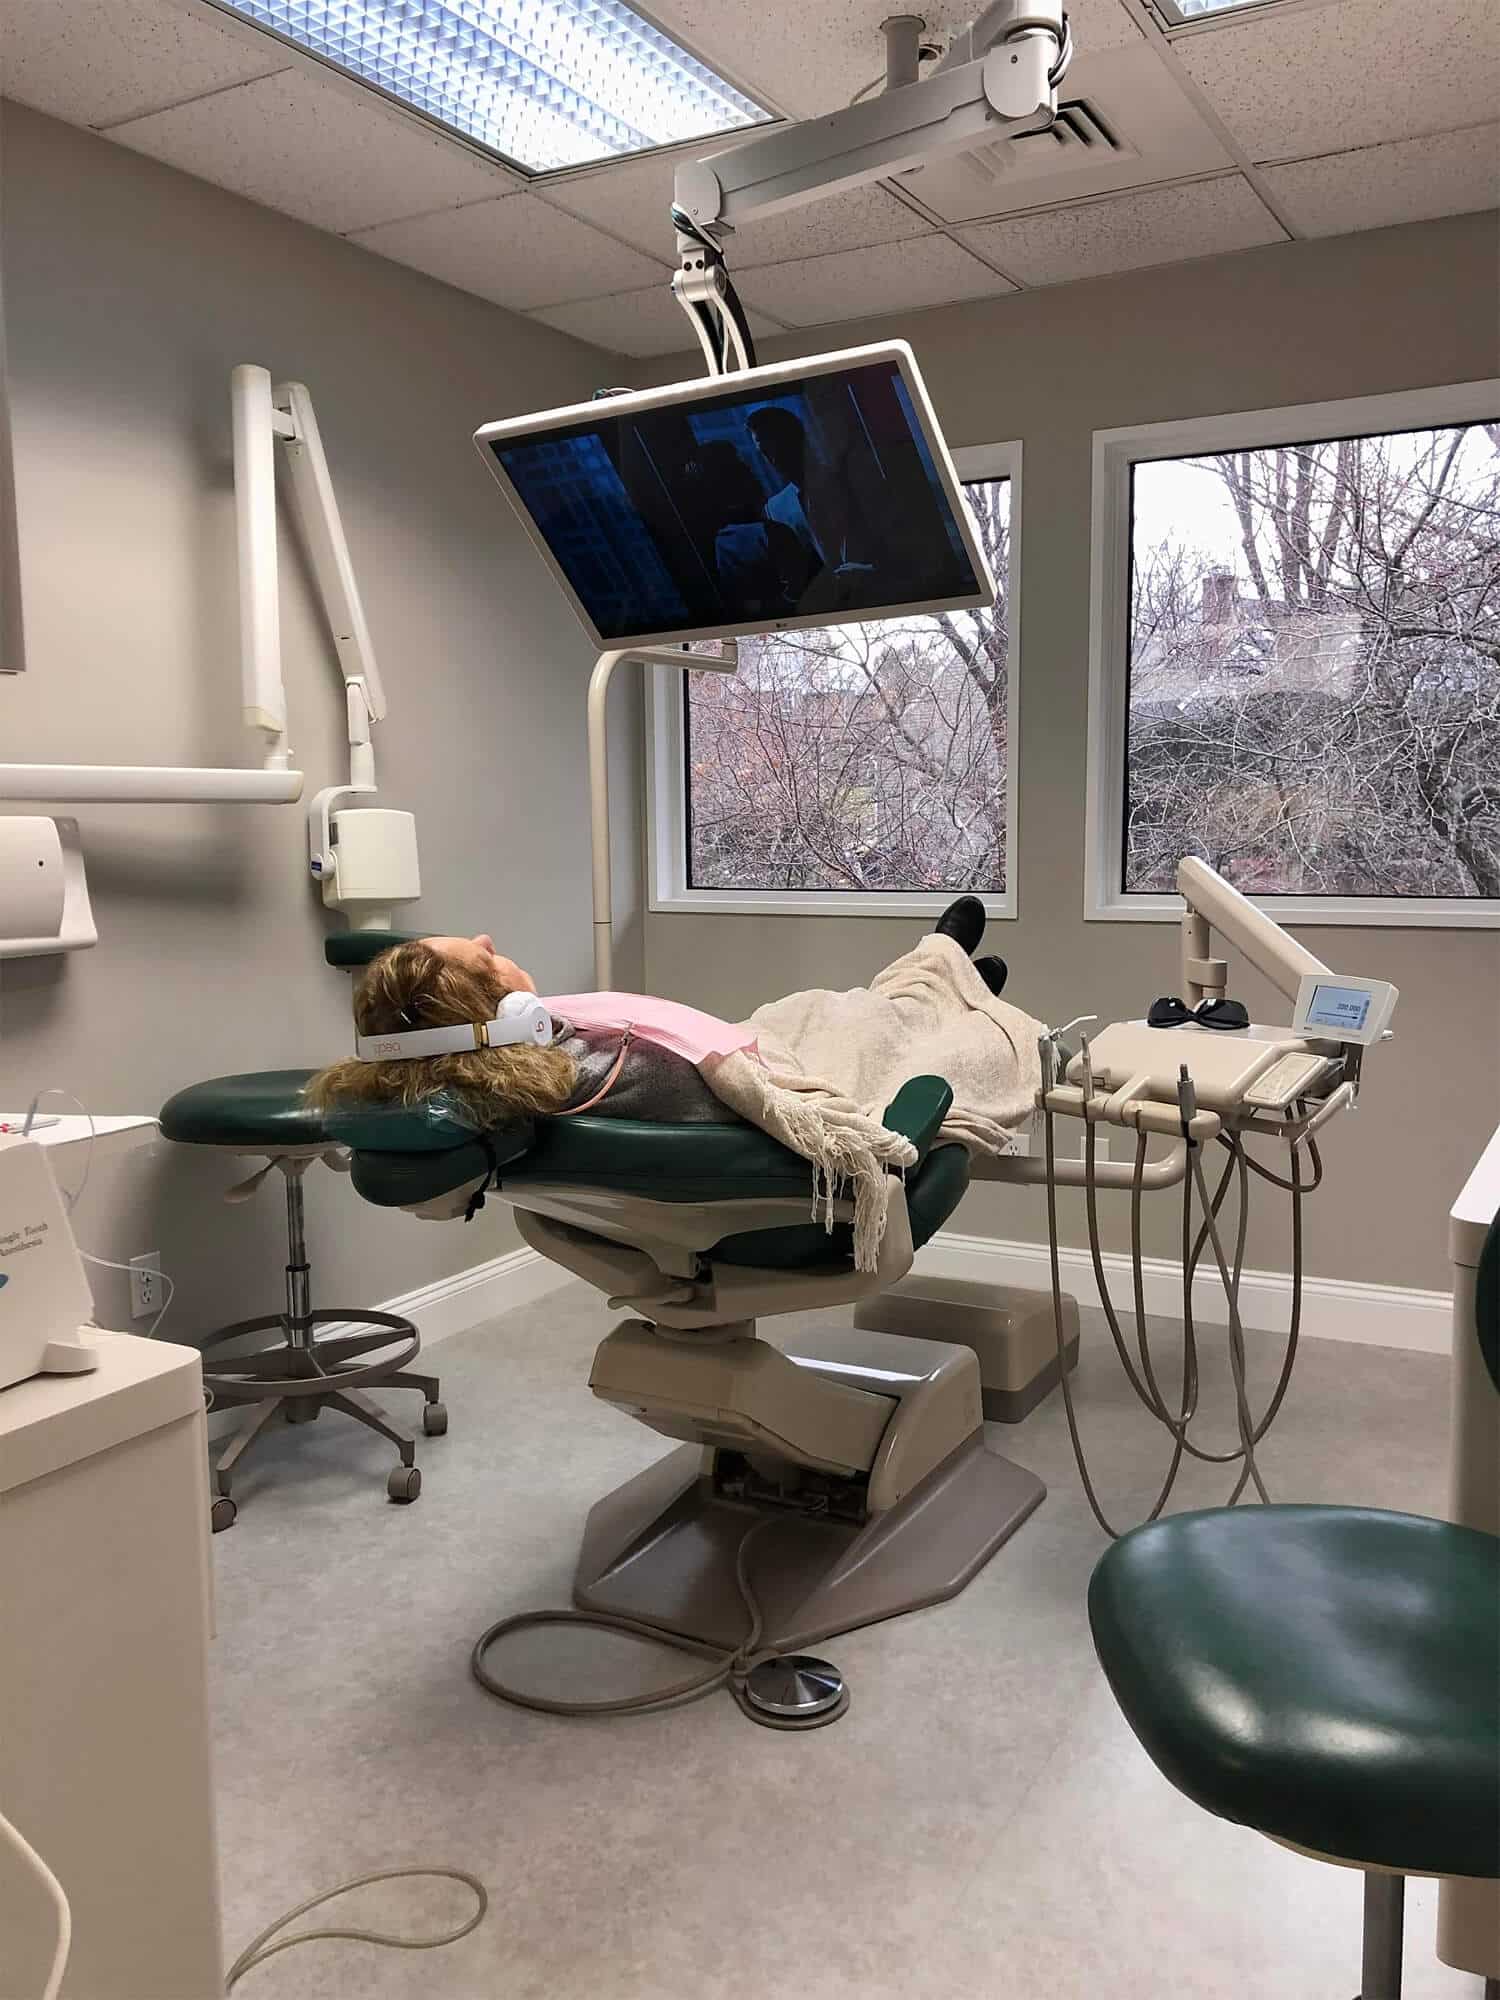 inside close up of dental operating room with large window and tv